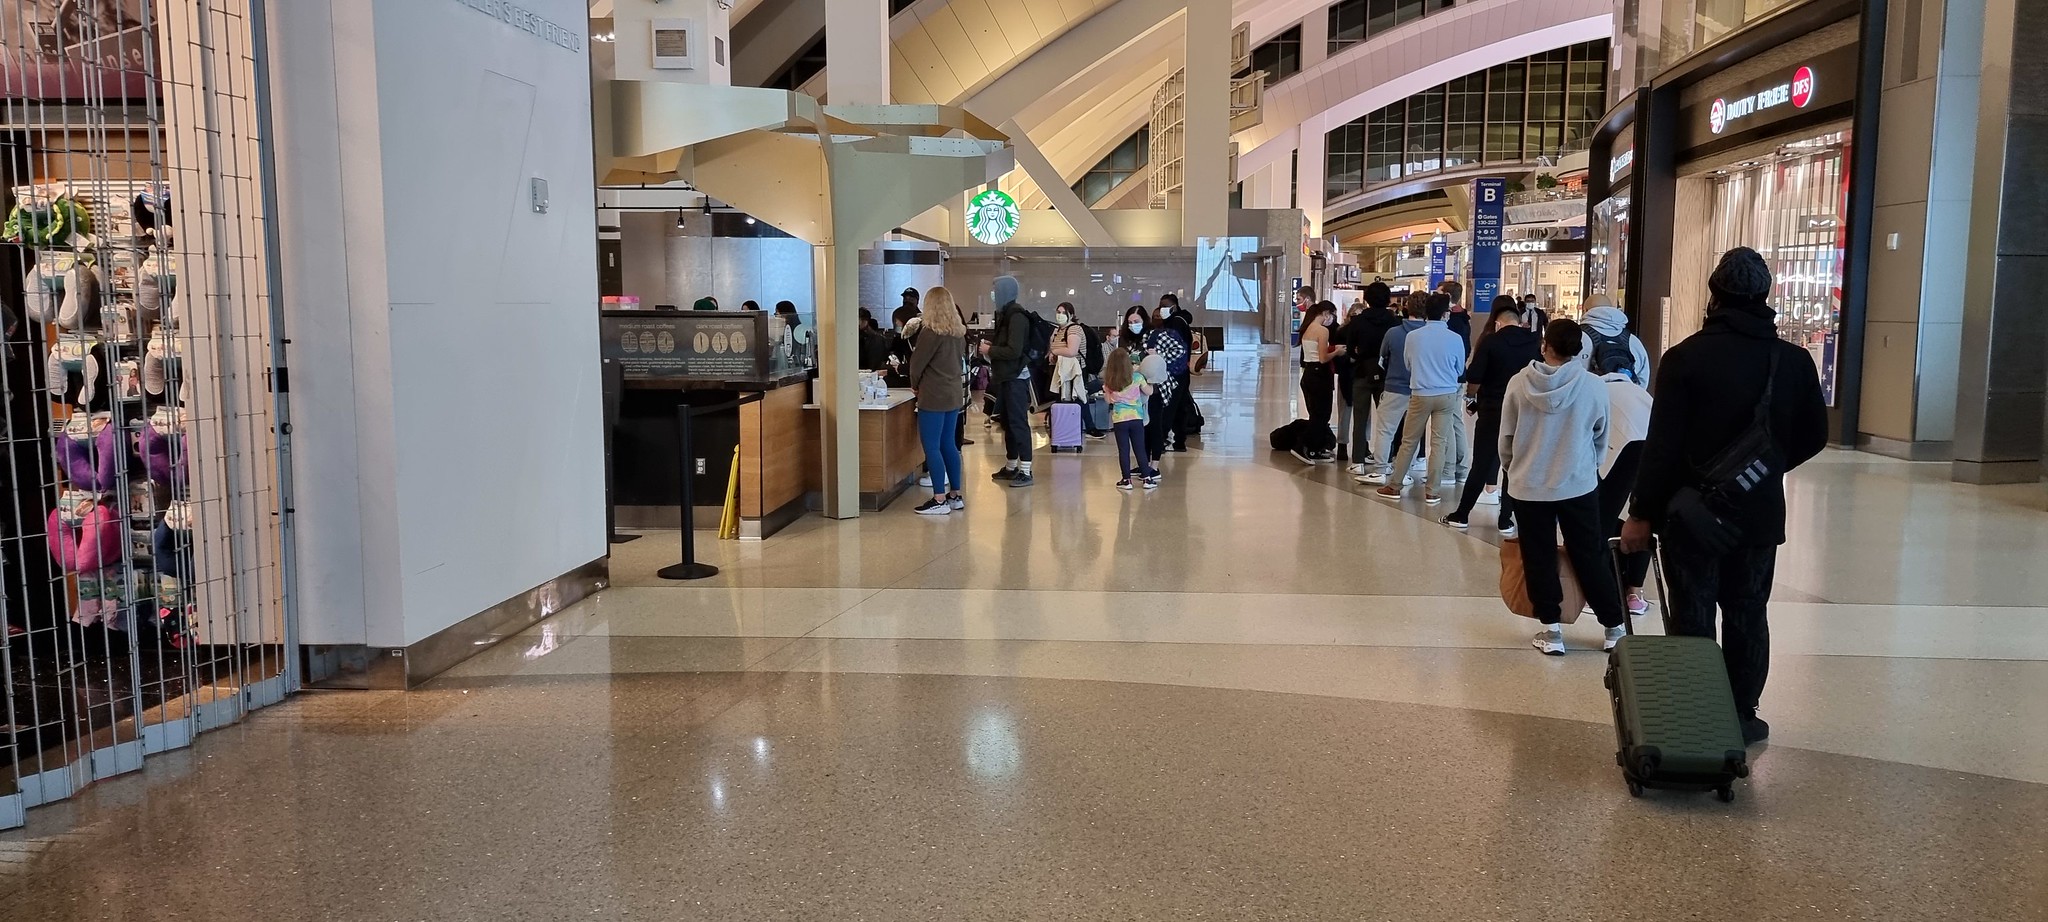 The massive queue at Starbucks in TBIT at LAX